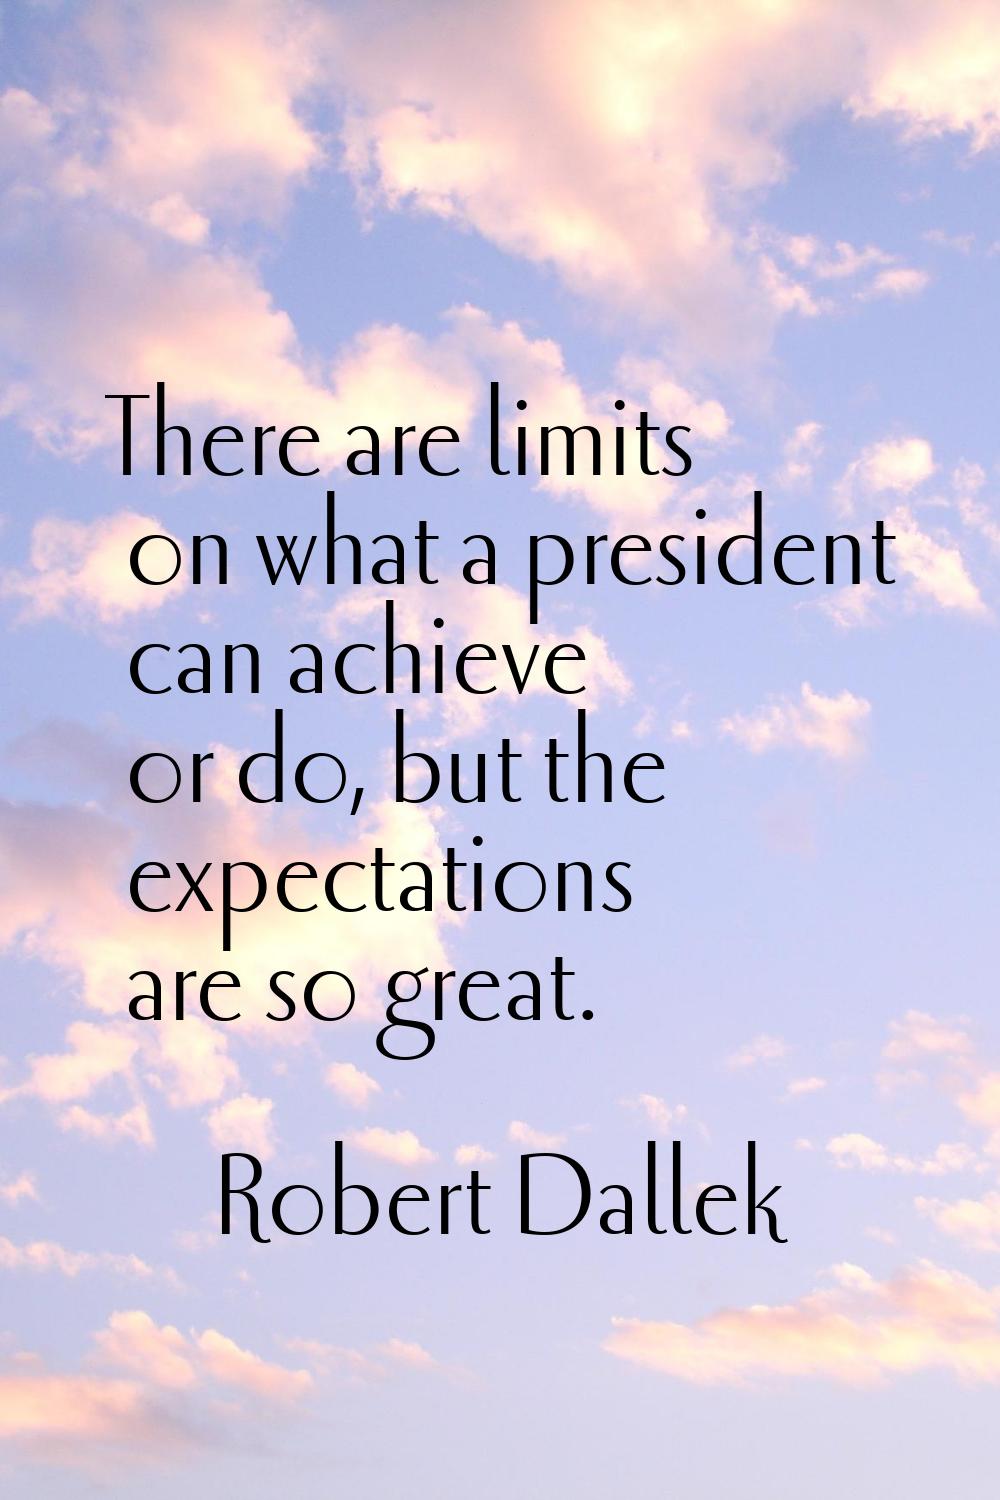 There are limits on what a president can achieve or do, but the expectations are so great.